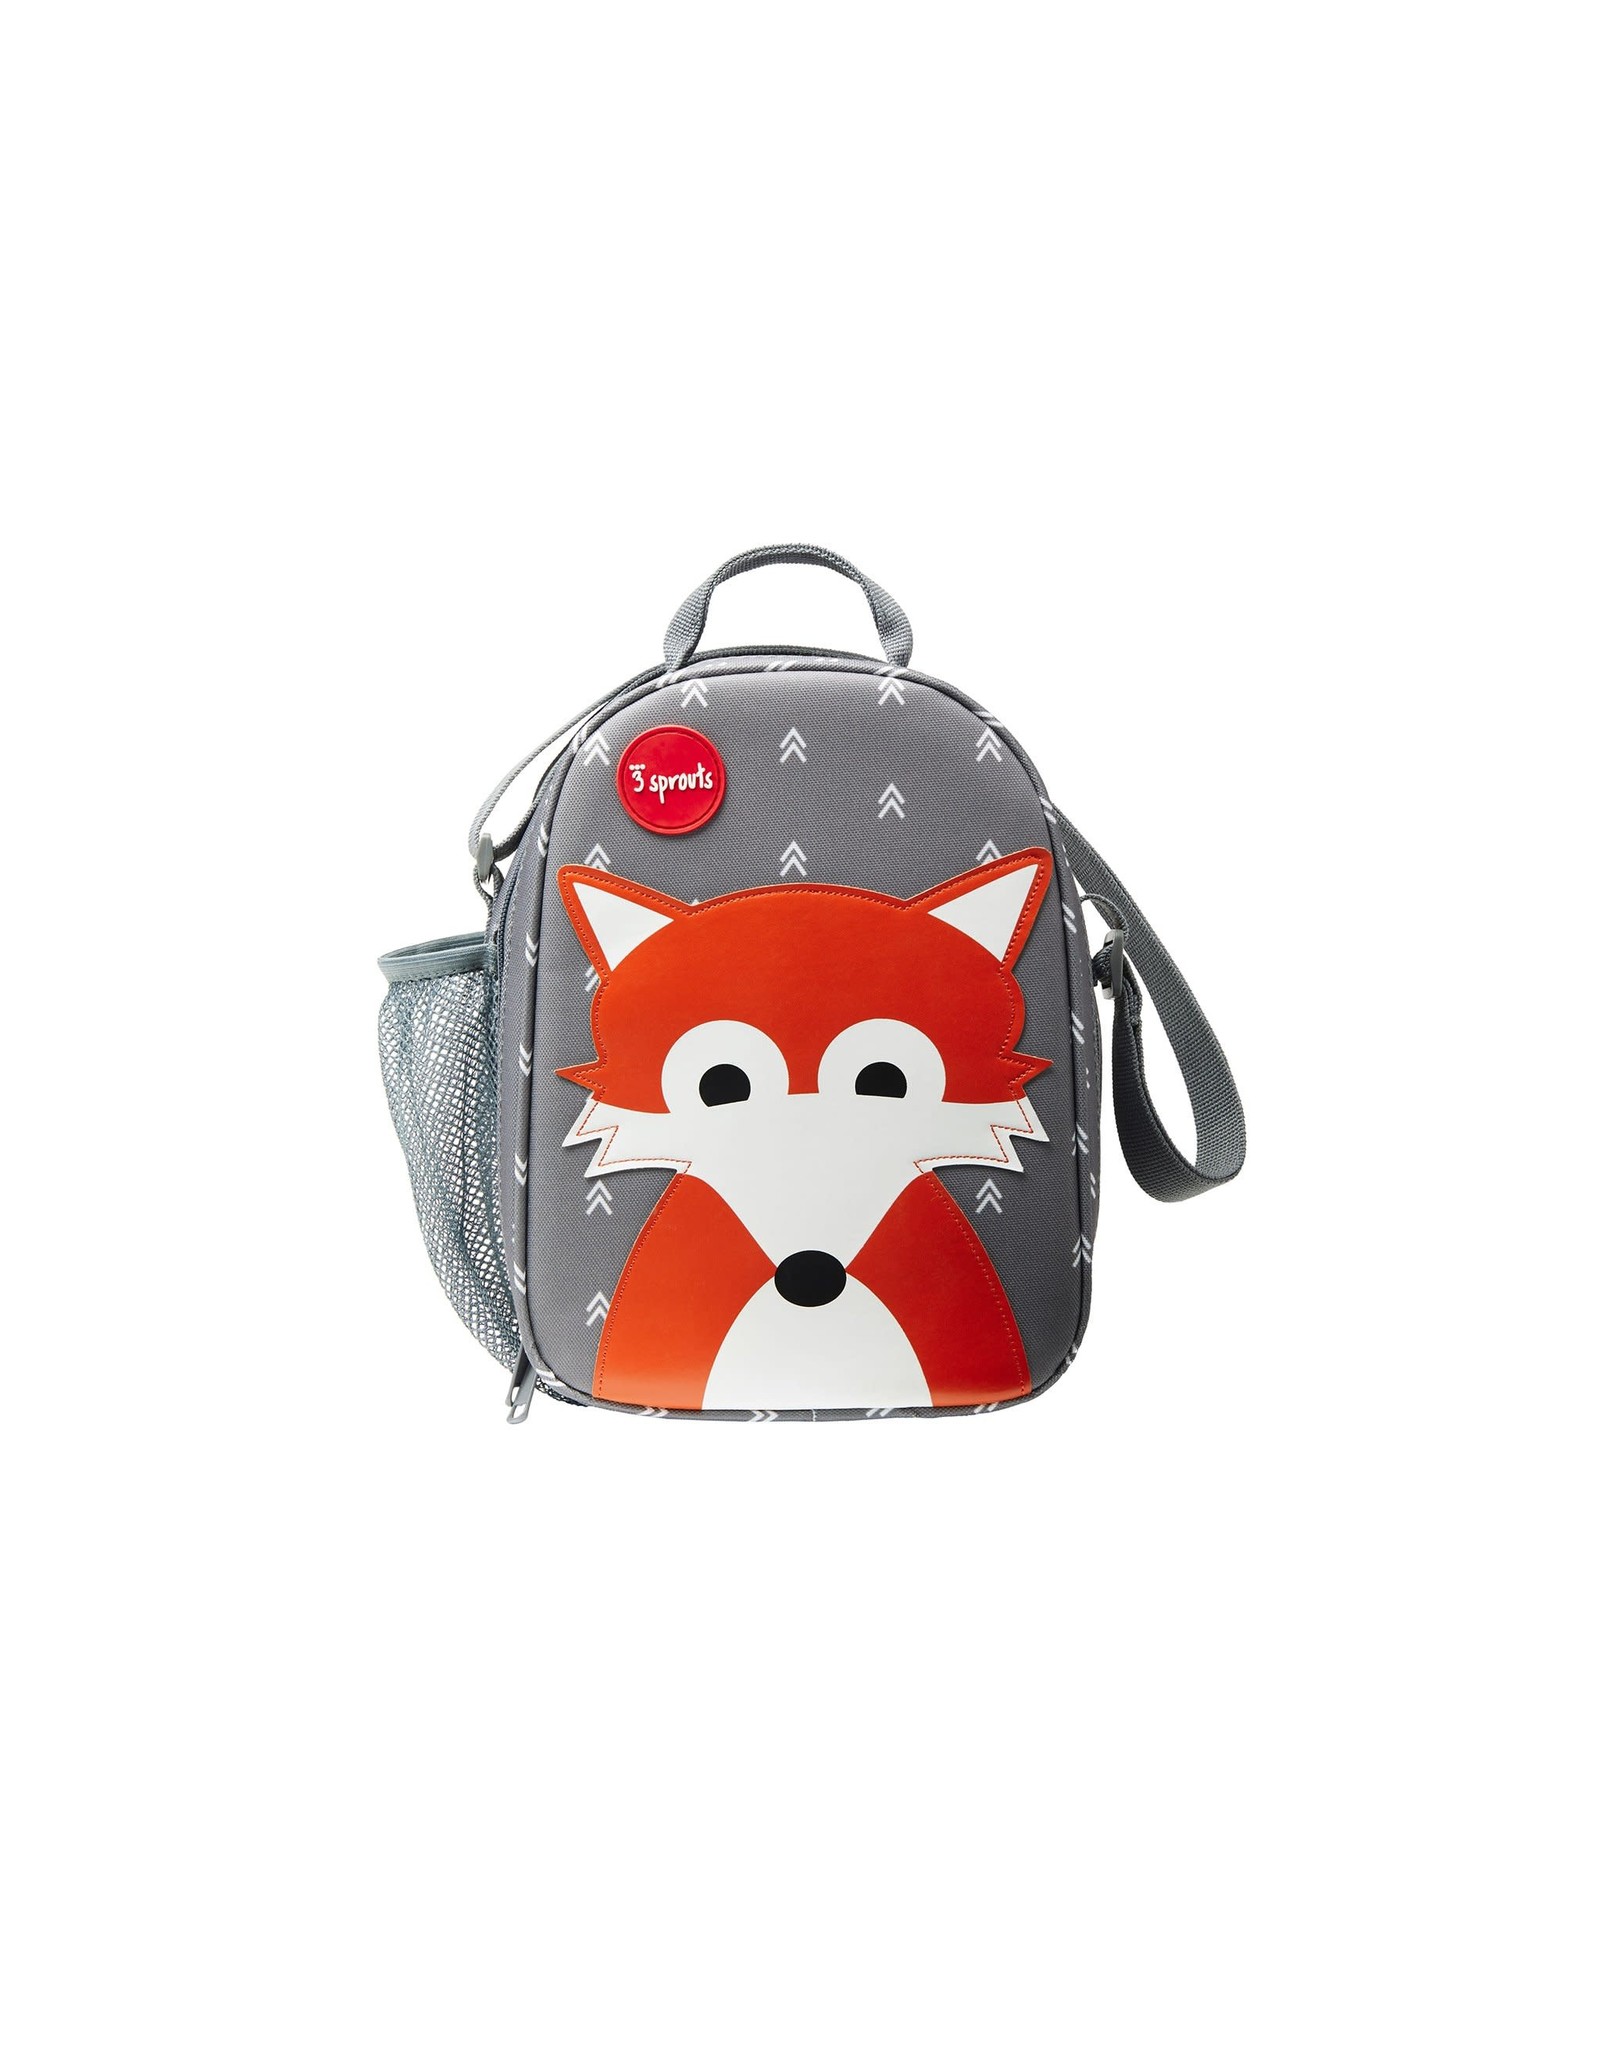 3 Sprouts Lunch Bag Gray Fox